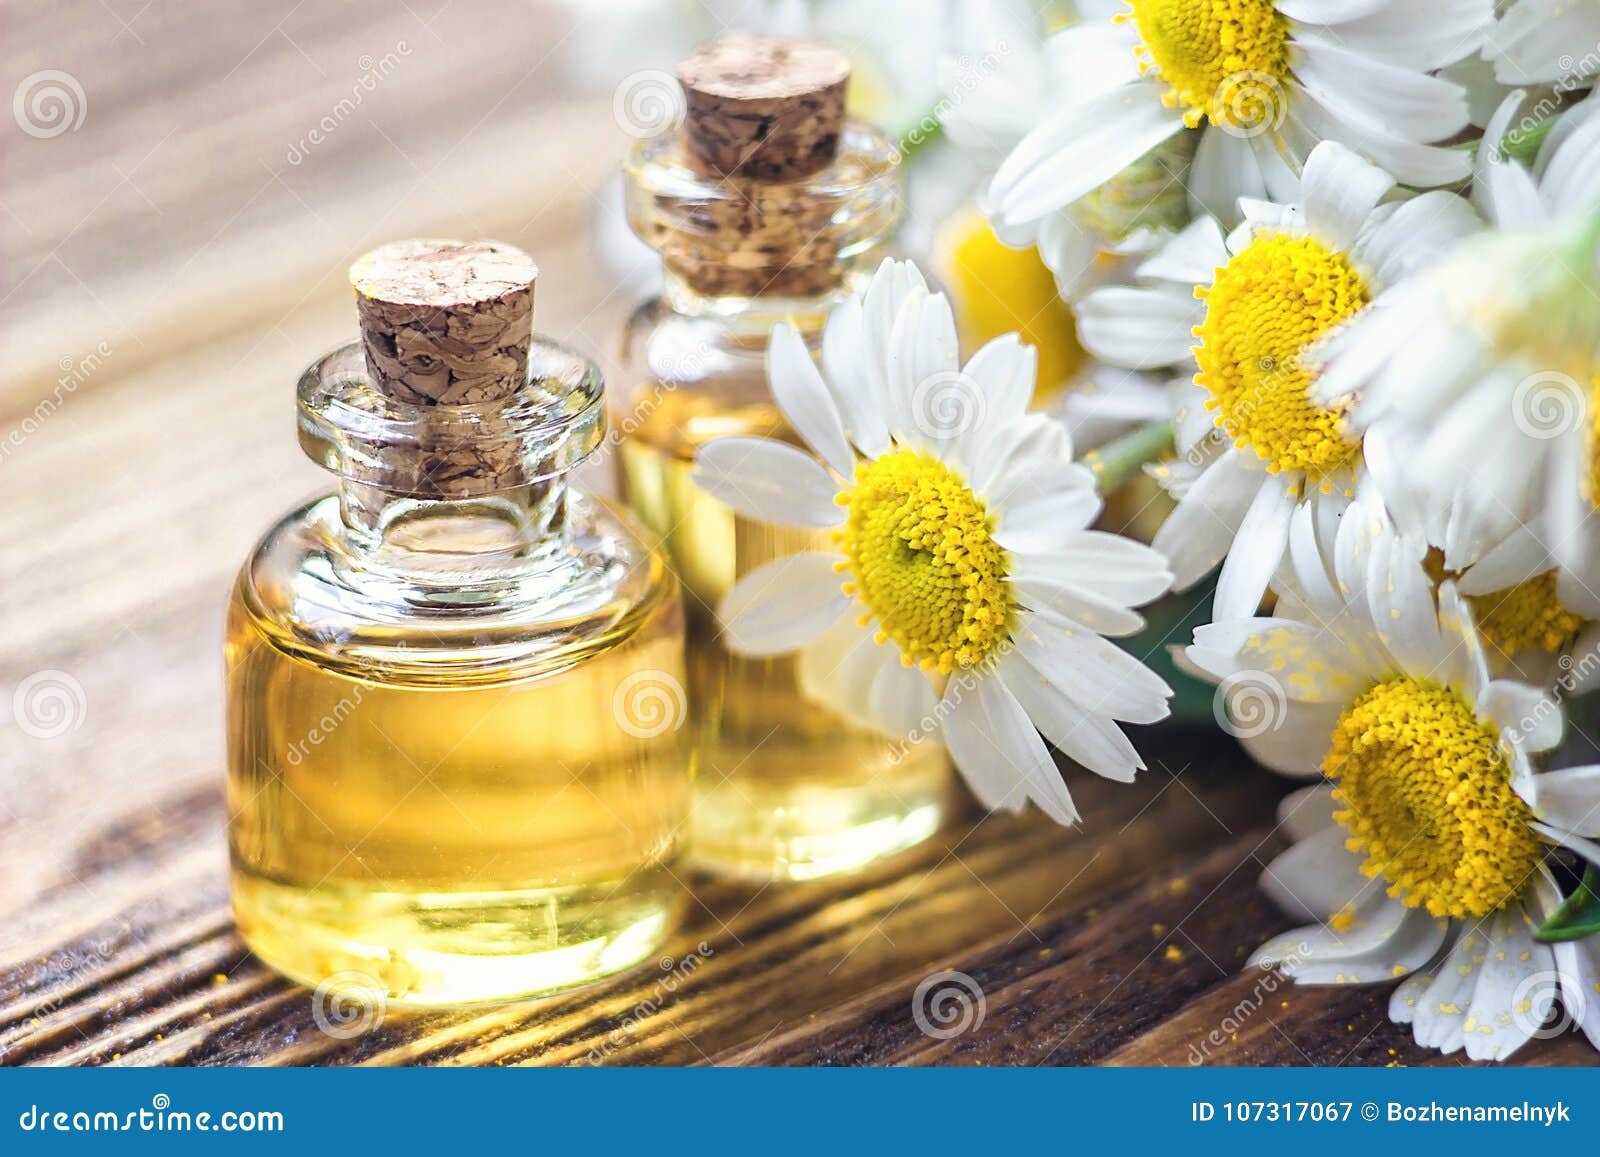 essential oil in glass bottle with fresh chamomile flowers, beauty treatment. spa concept. selective focus. fragrant oil of chamom